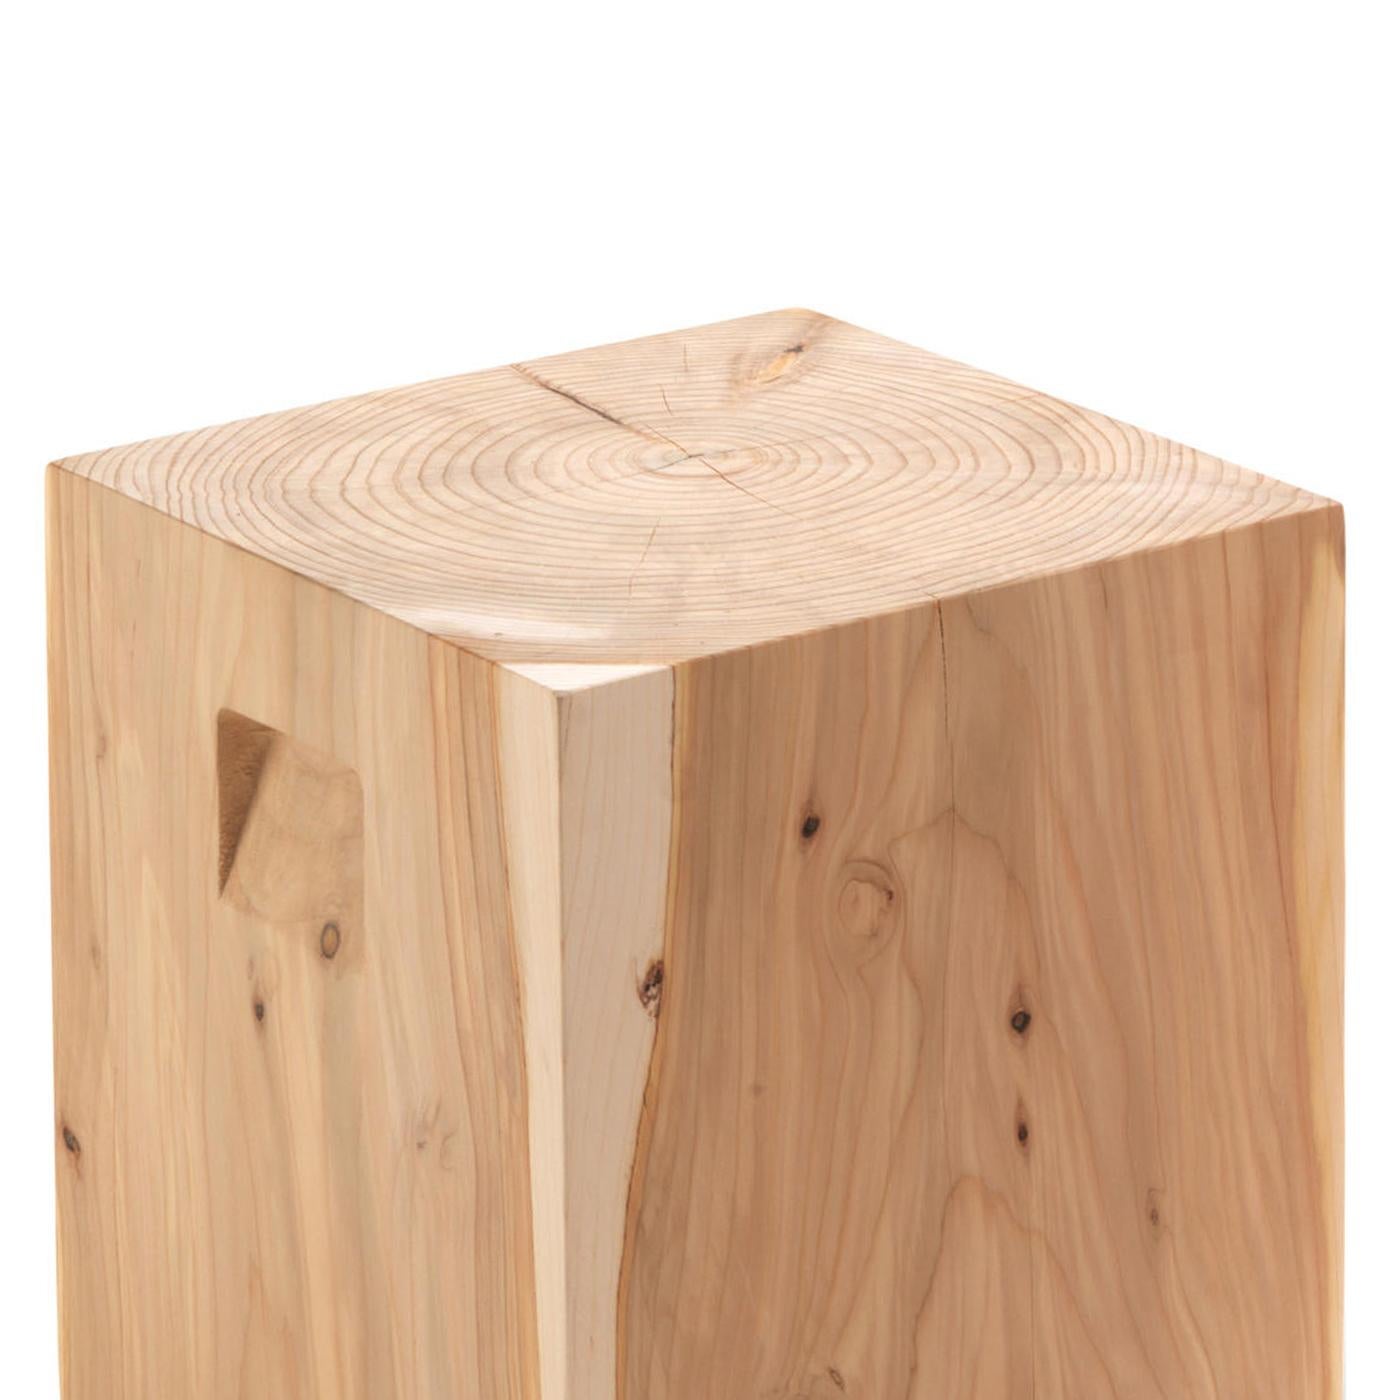 Stool cube cedar made in a block of natural
solid cedar trunk. Treated with wax with natural
pine extracts.
Solid cedar wood include movement, 
cracks and changes in wood conditions, 
this is the essential characteristic of natural 
solid cedar wood